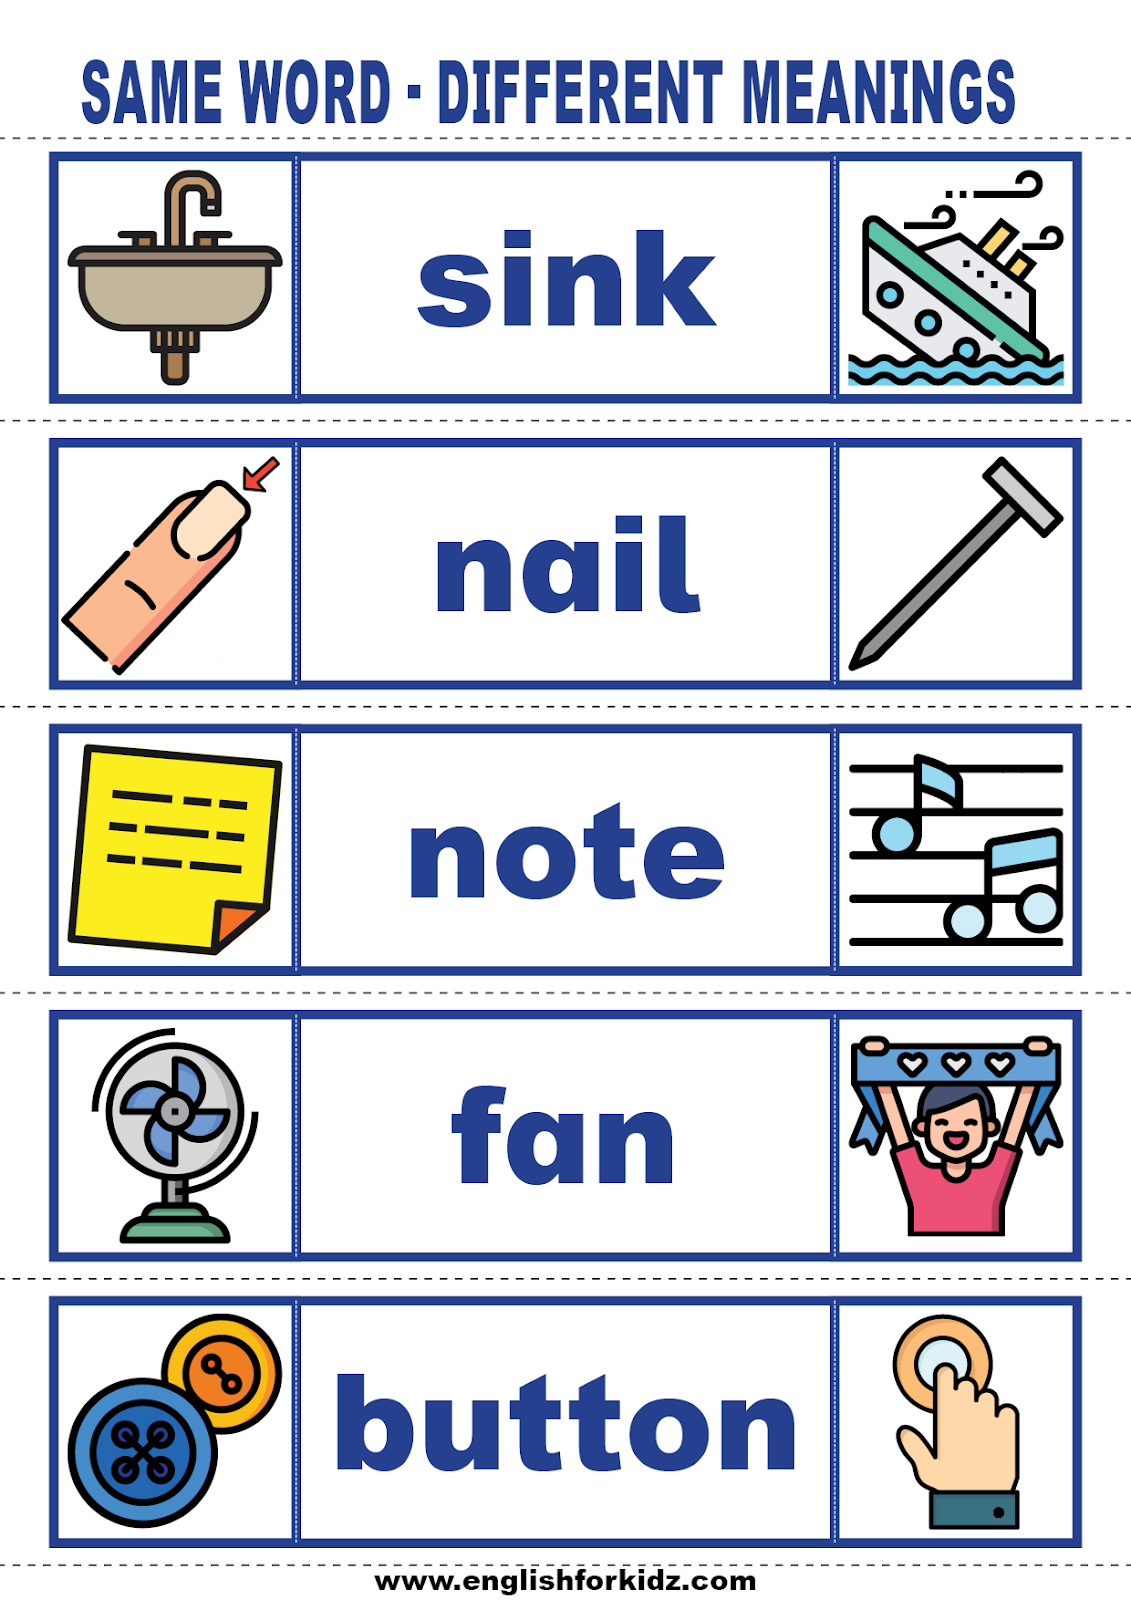 English for Kids Step by Step: Vocabulary Cards: Same Word - Different